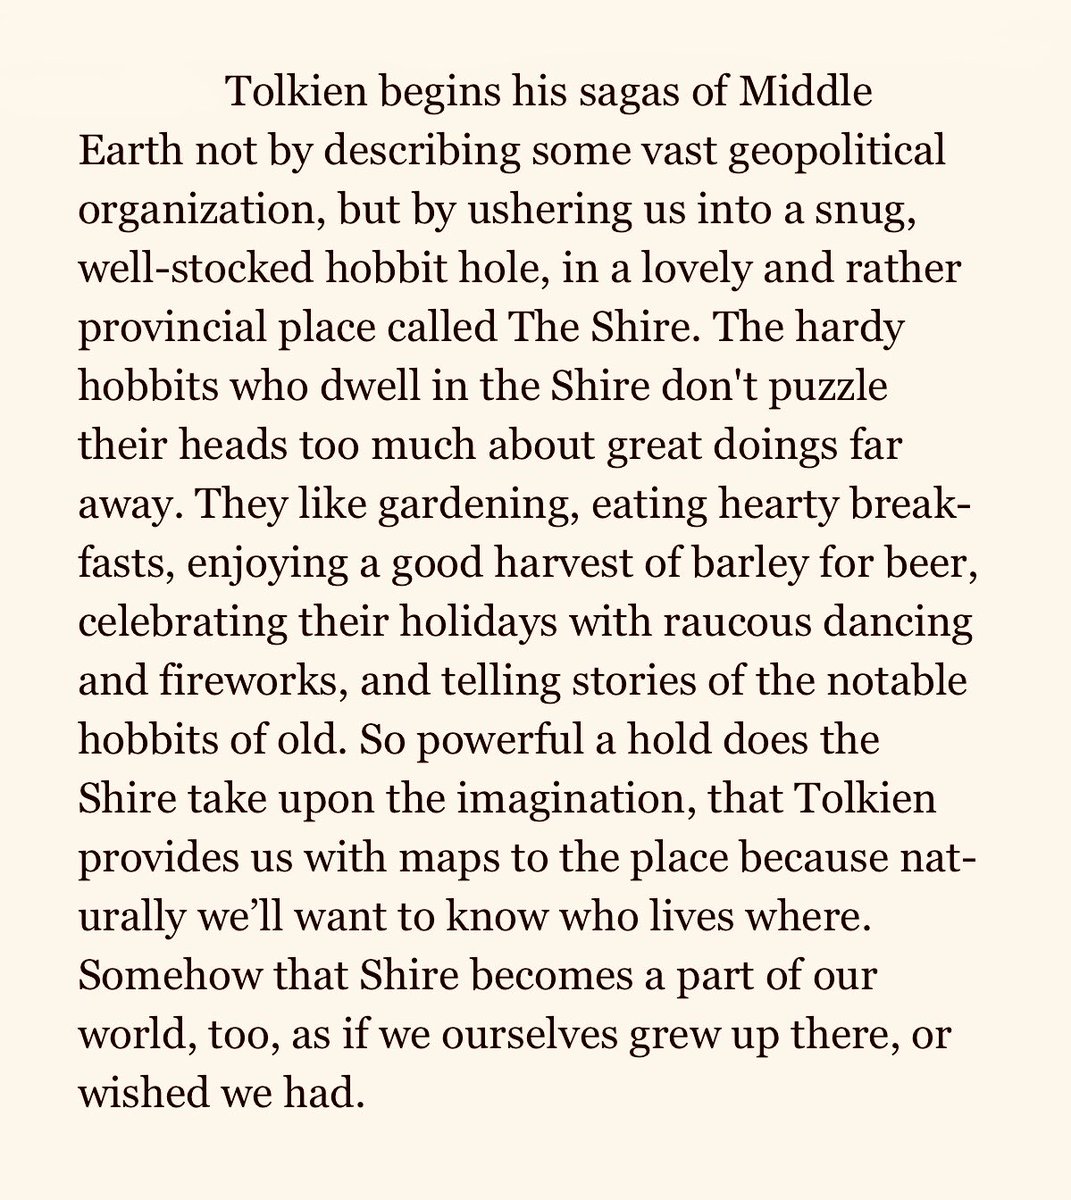 “Tolkien begins his sagas of Middle Earth not by describing some vast geopolitical organization, but by ushering us into a snug, well-stocked hobbit hole, in a lovely and rather provincial place called The Shire.”—Ten Ways to Destroy the Imagination of Your Child, Anthony Esolen